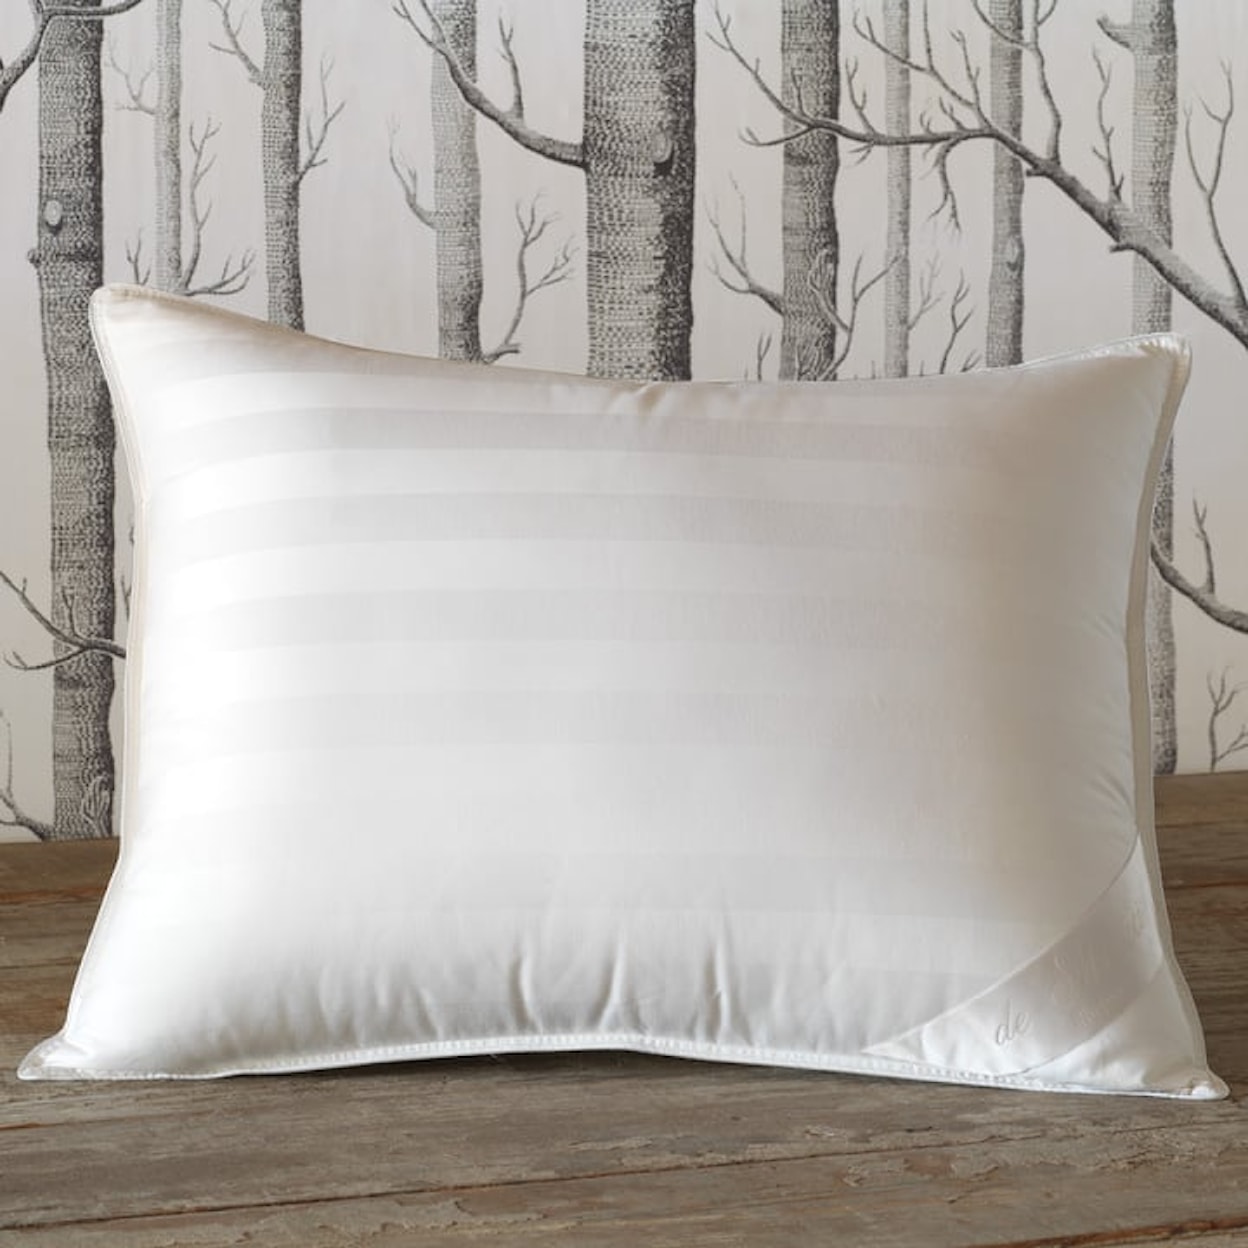 Eastern Accents Bedding Basics RHAPSODY LUXE DOWN PILLOW